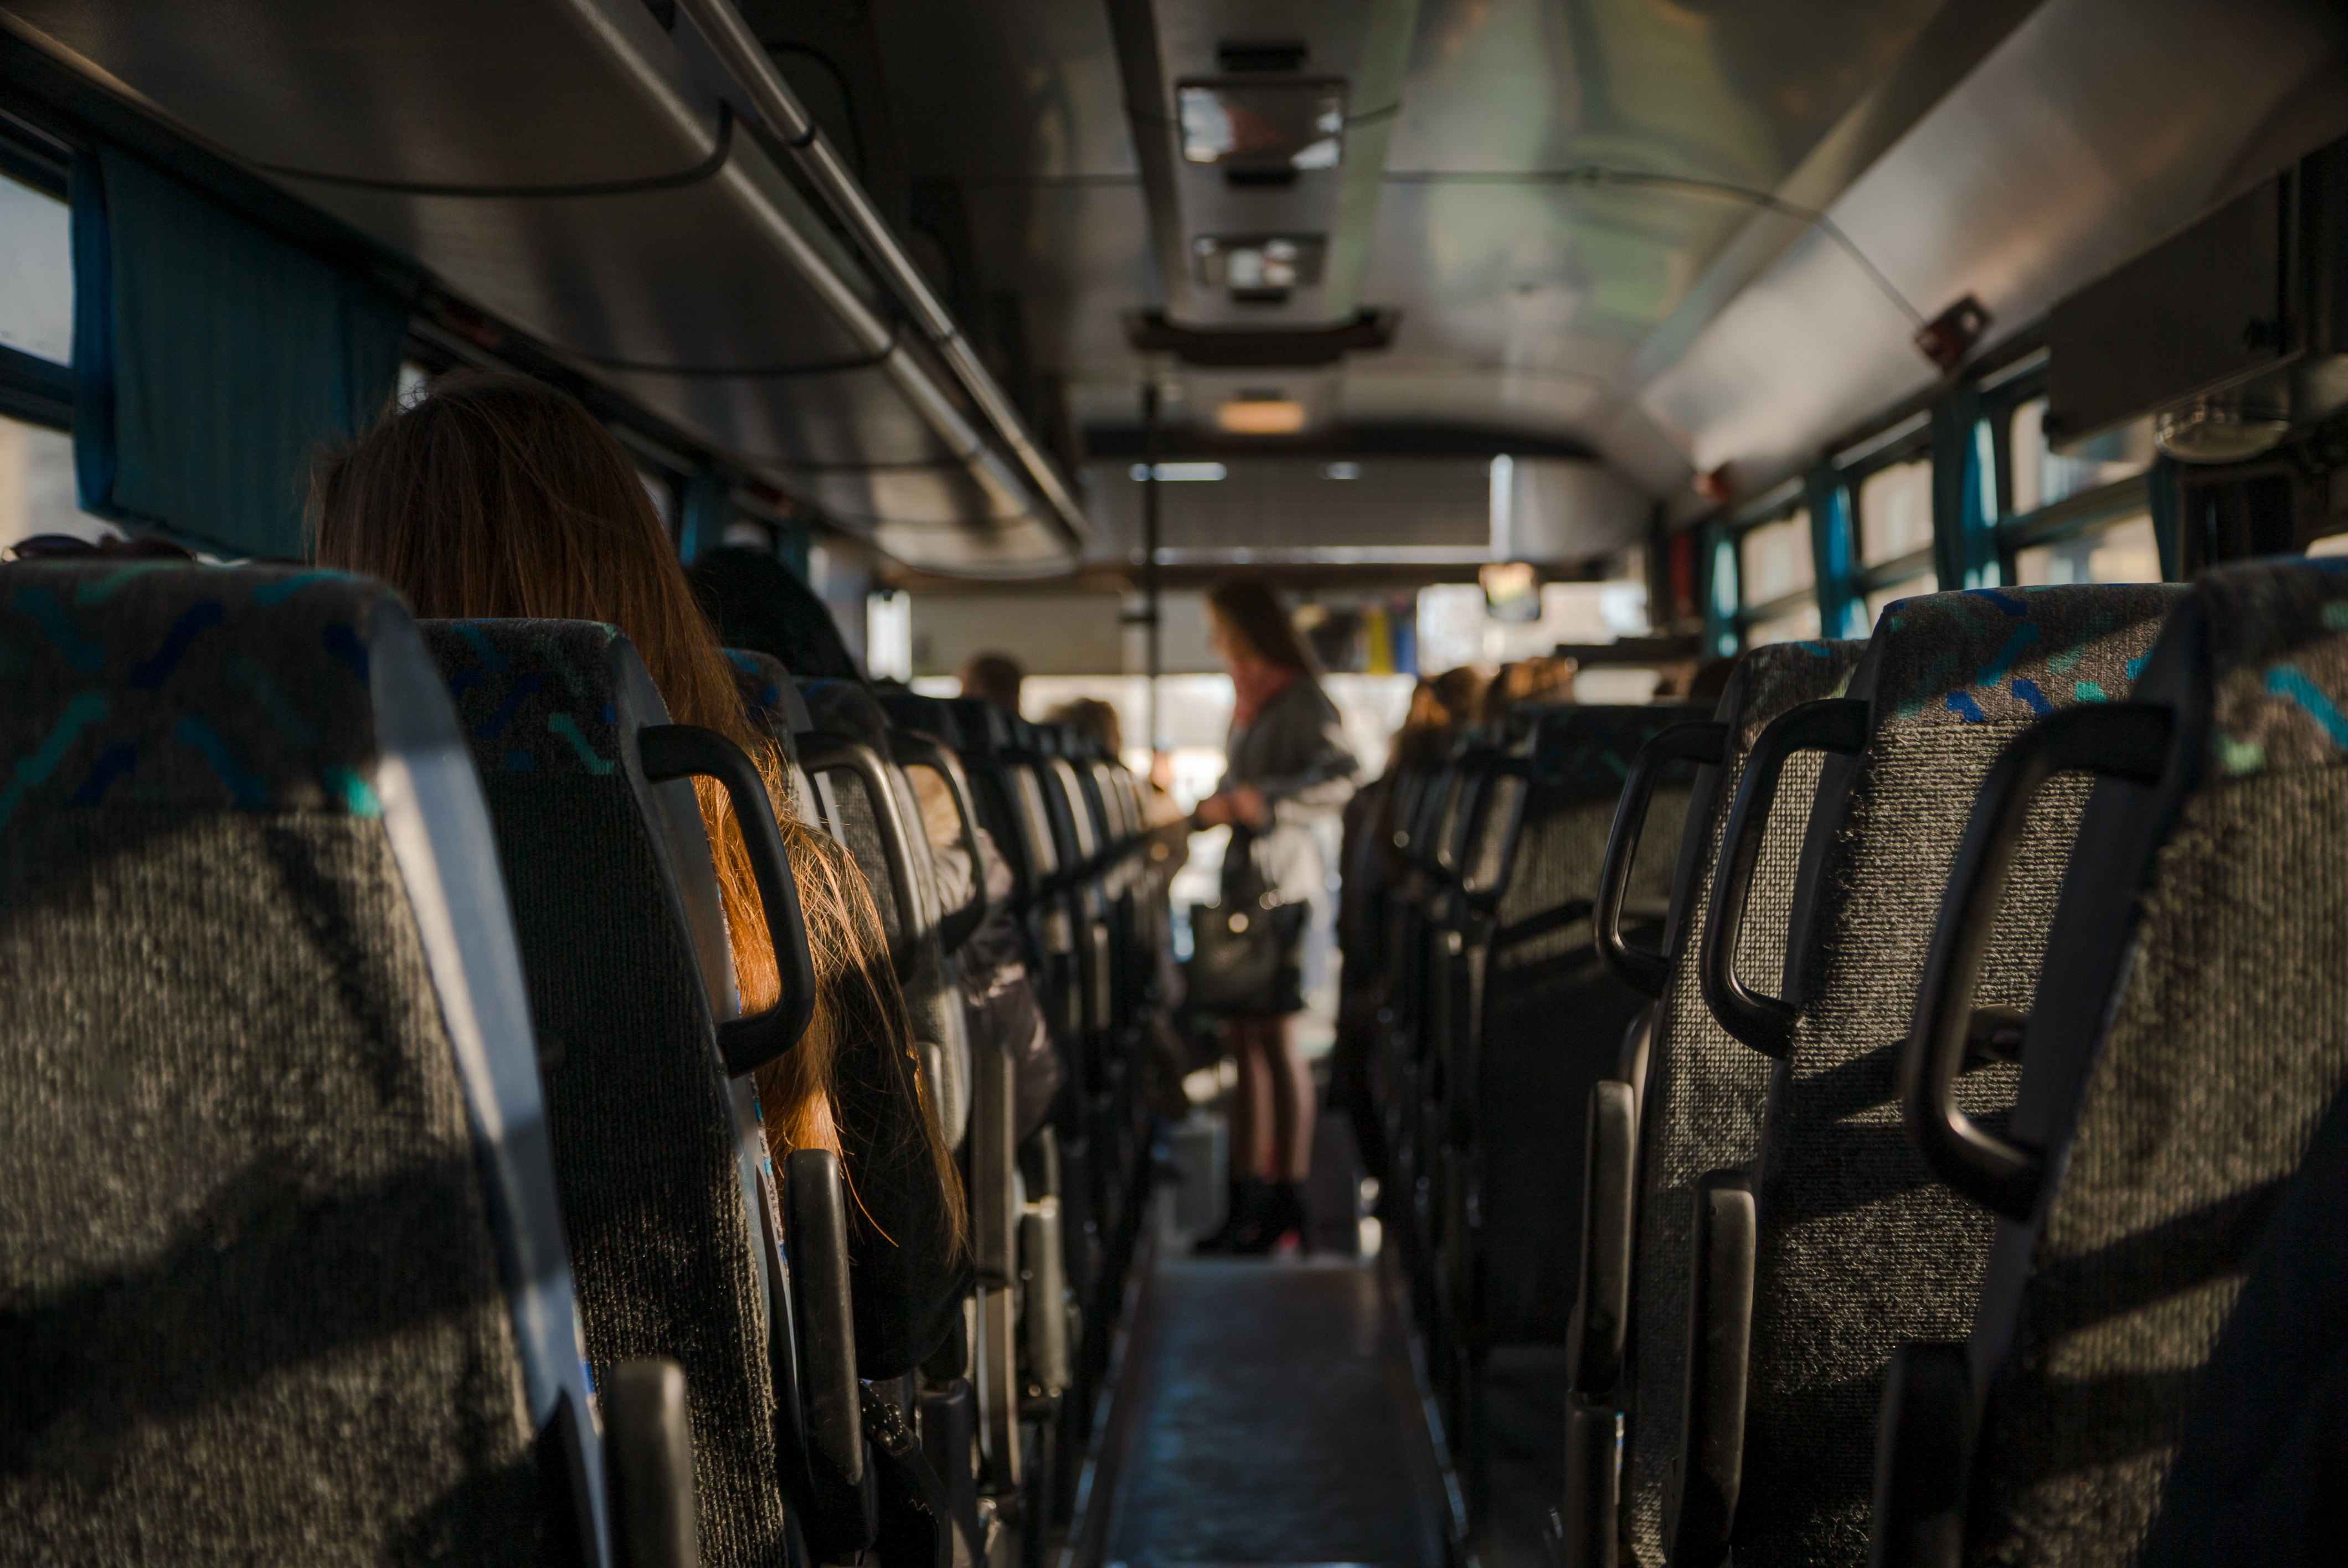 Inside of a charter bus